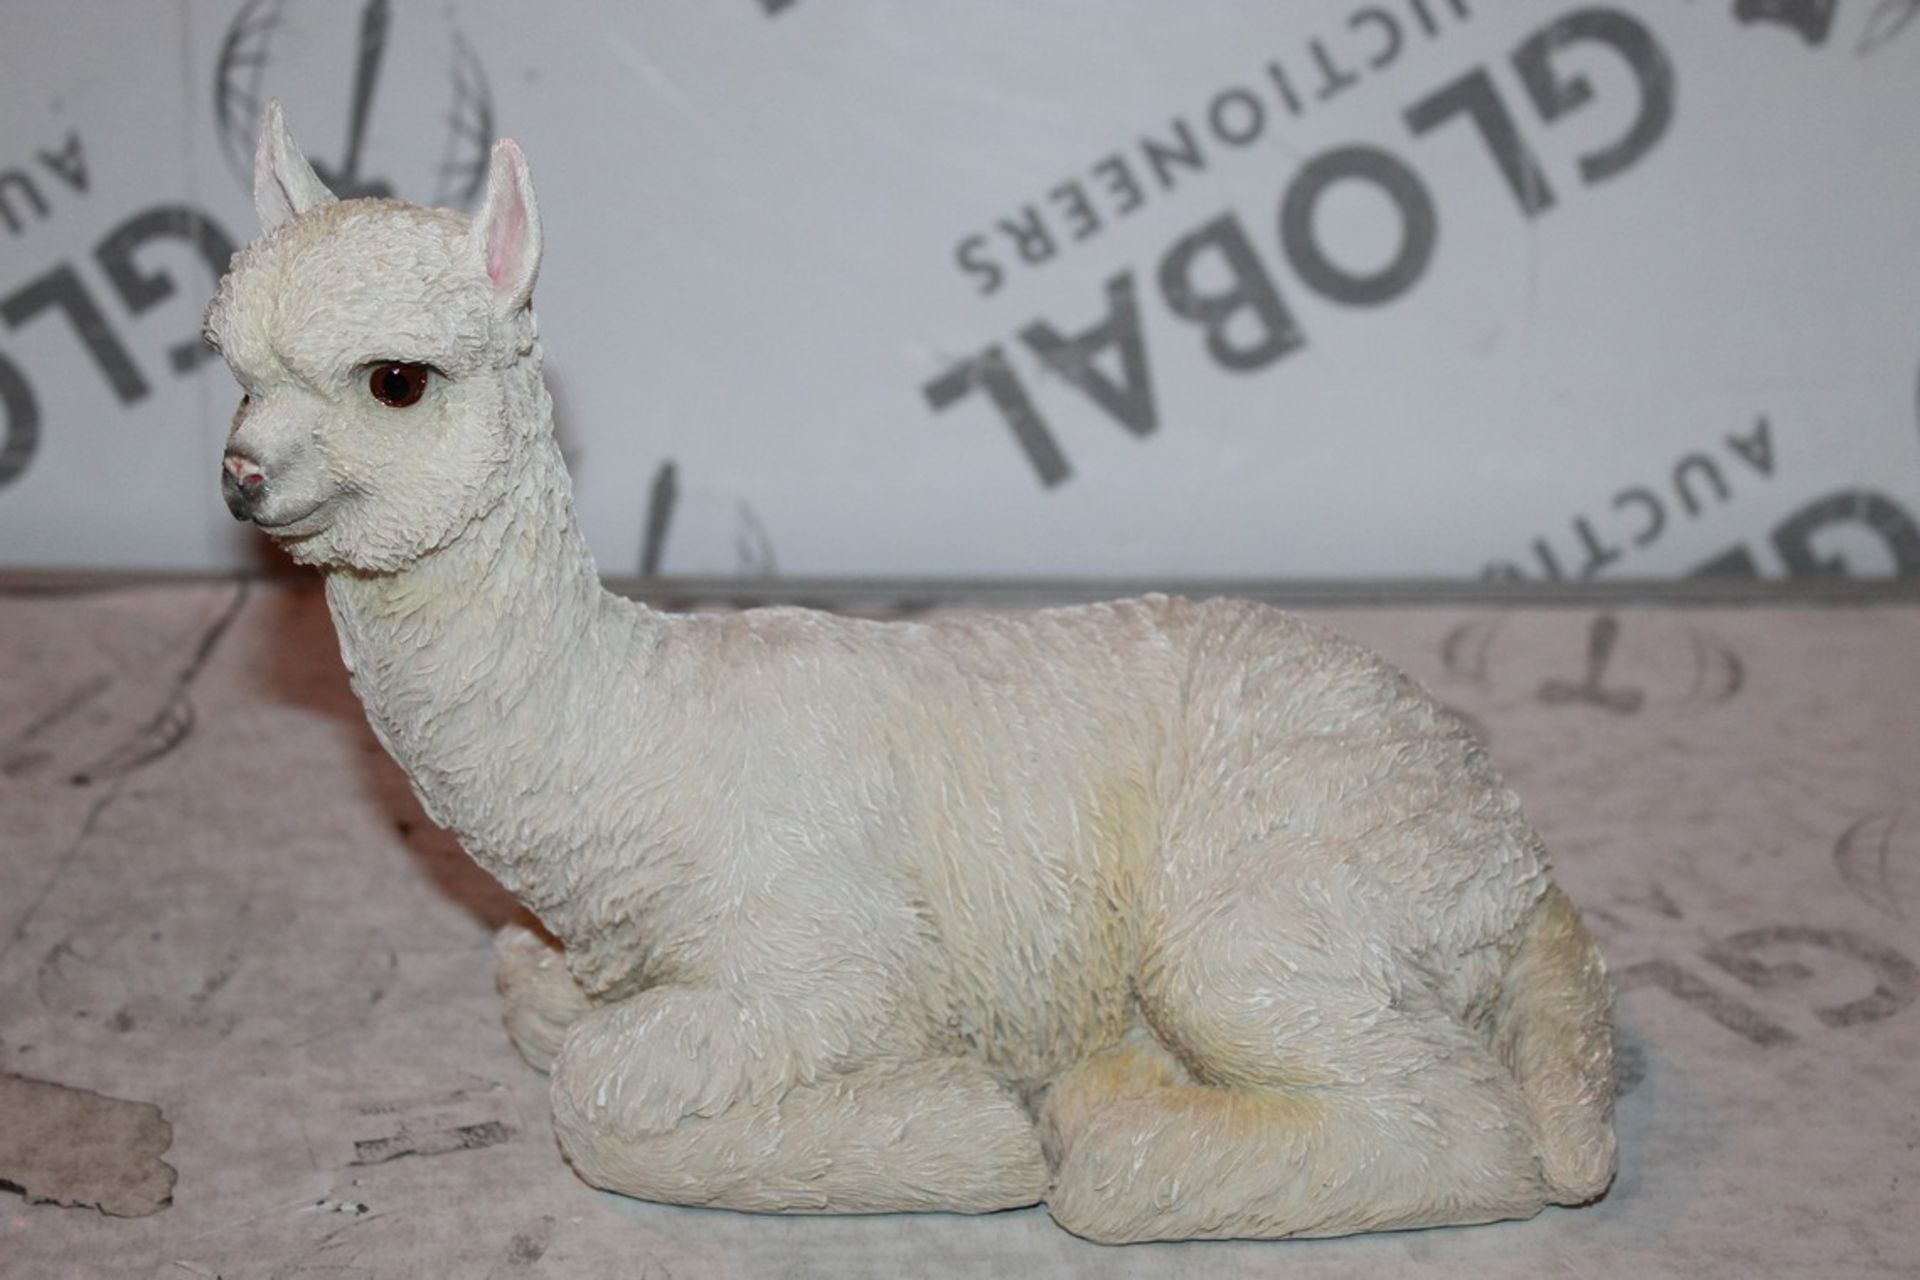 Lot to Contain 5 Brand New Nature Craft Llama 19cm Seated Llama Resin Figurines Combined RRP £100 (